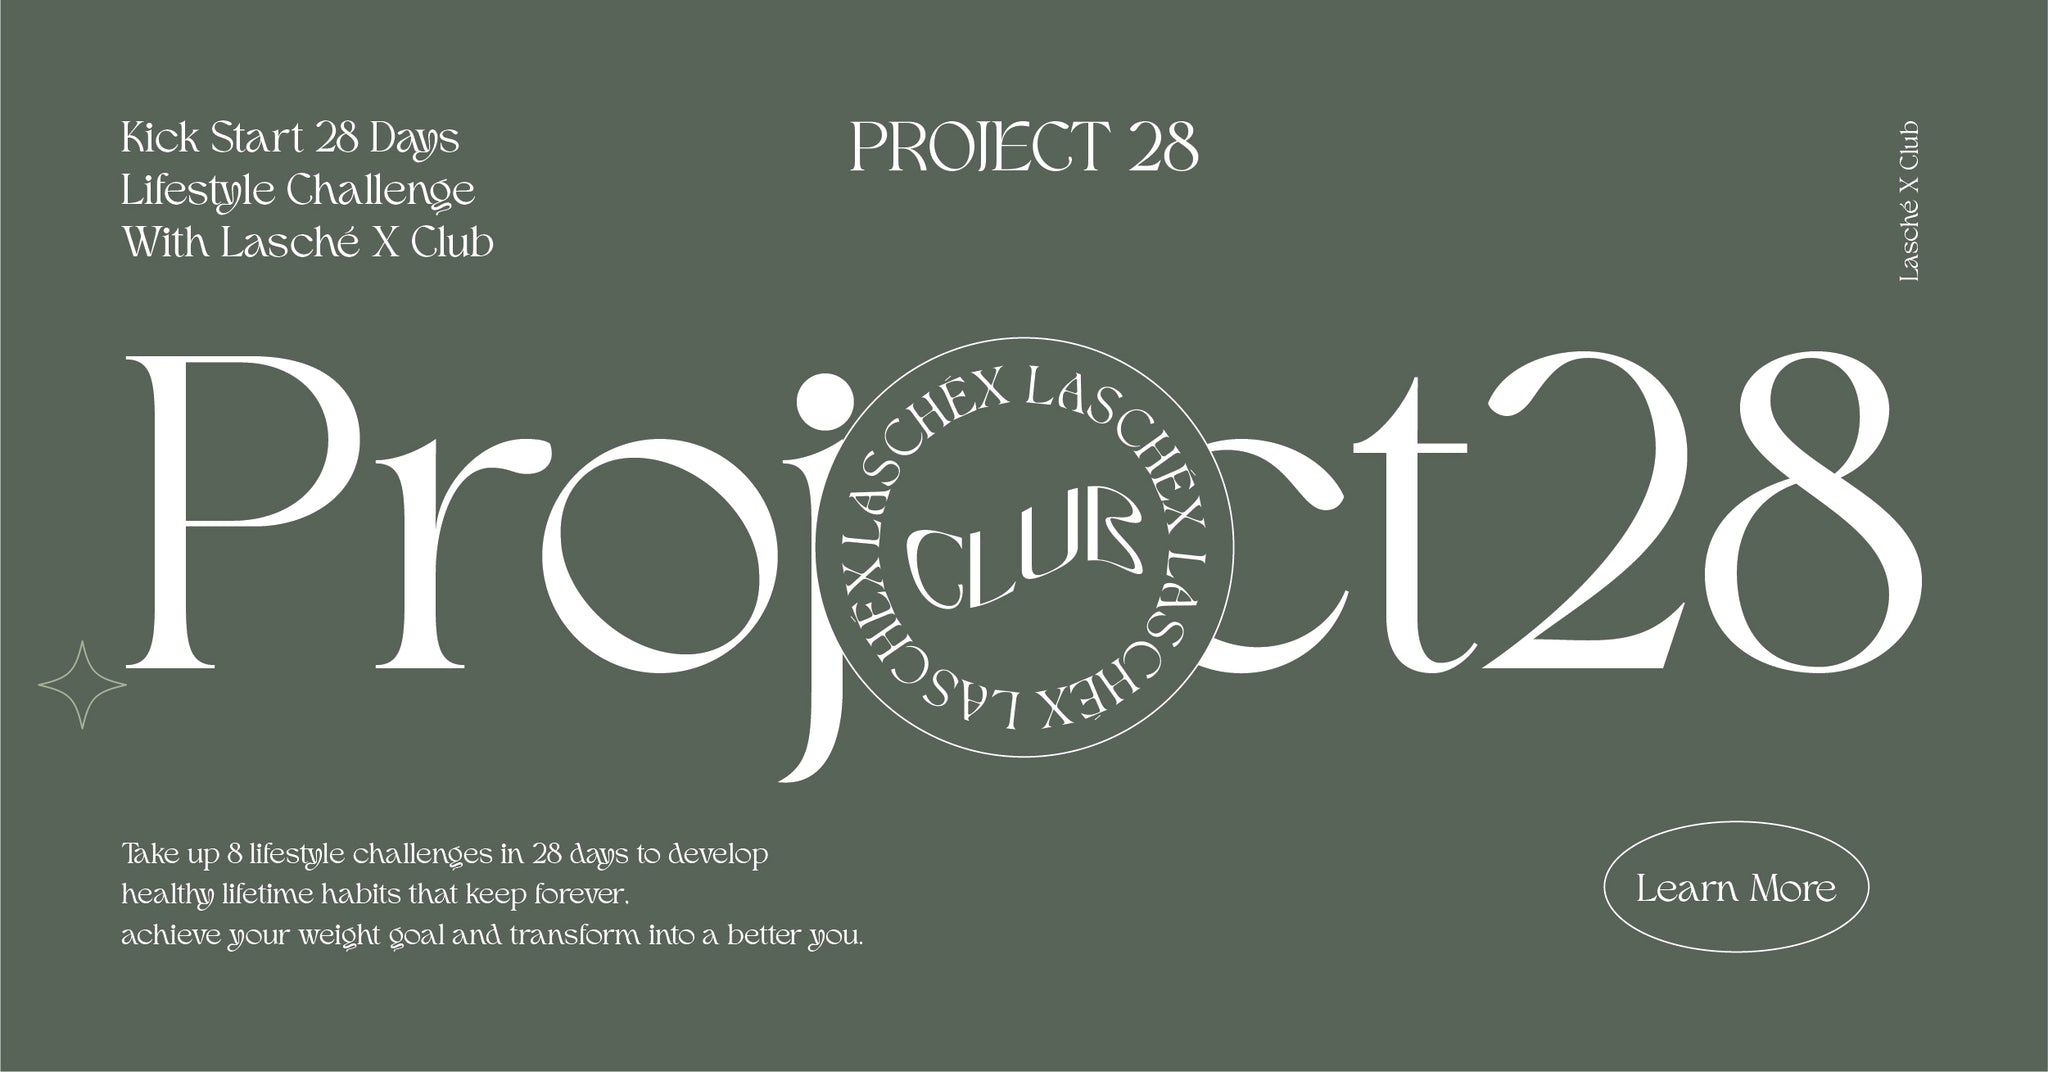 28 days Lifestyle Challenge with Lasché x Club - Project 28